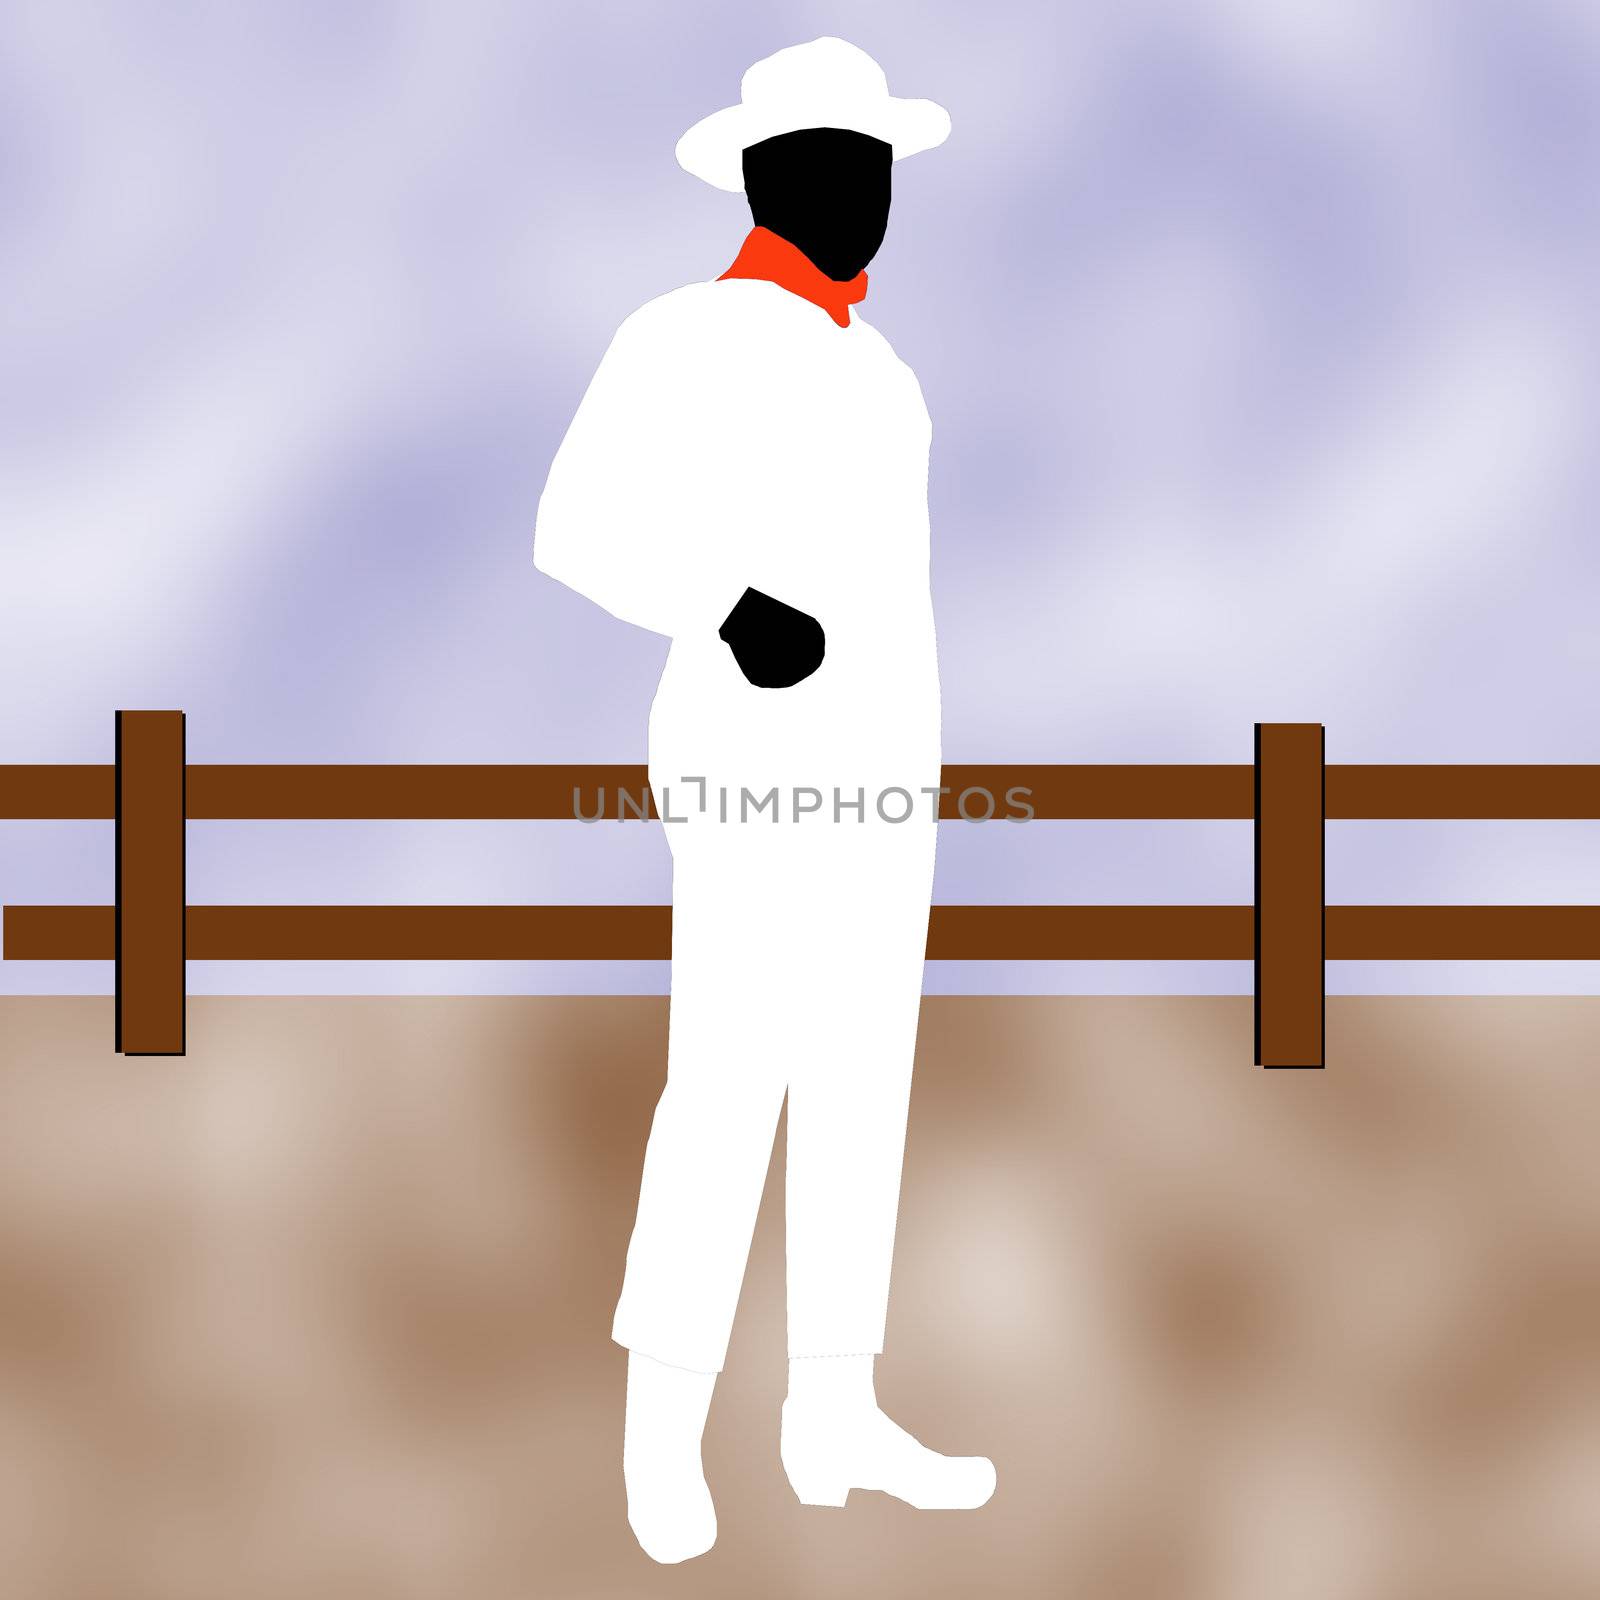 A cowboy in white standing in front of a wooden fence.